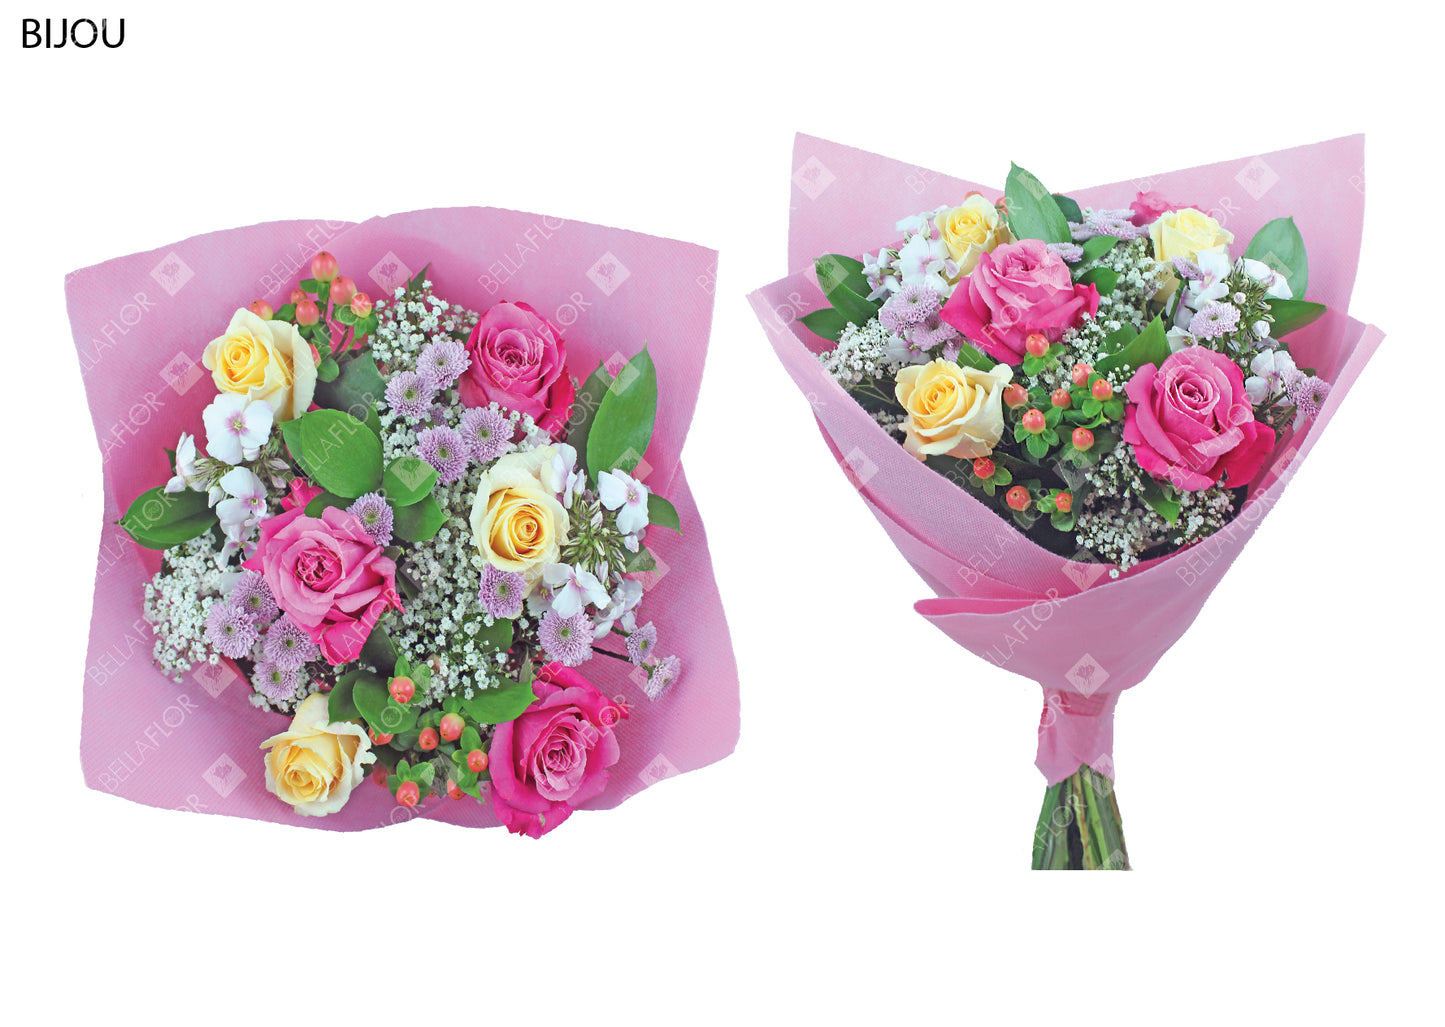 Bijou Mother's Day Bouquets